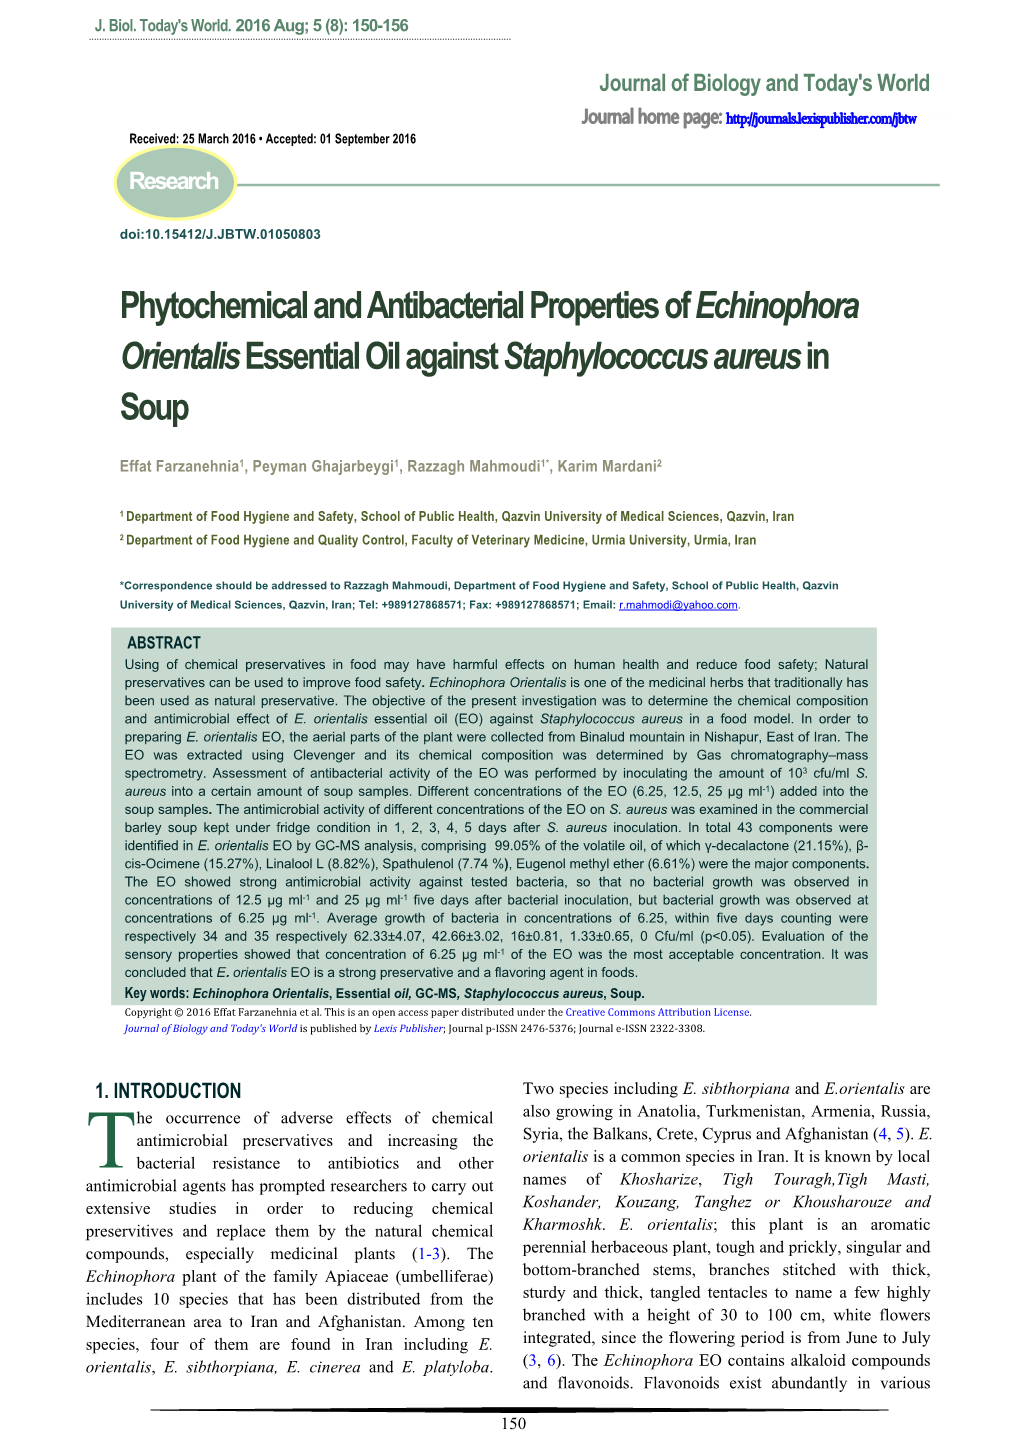 Phytochemical and Antibacterial Properties of Echinophora Orientalis Essential Oil Against Staphylococcus Aureus in Soup